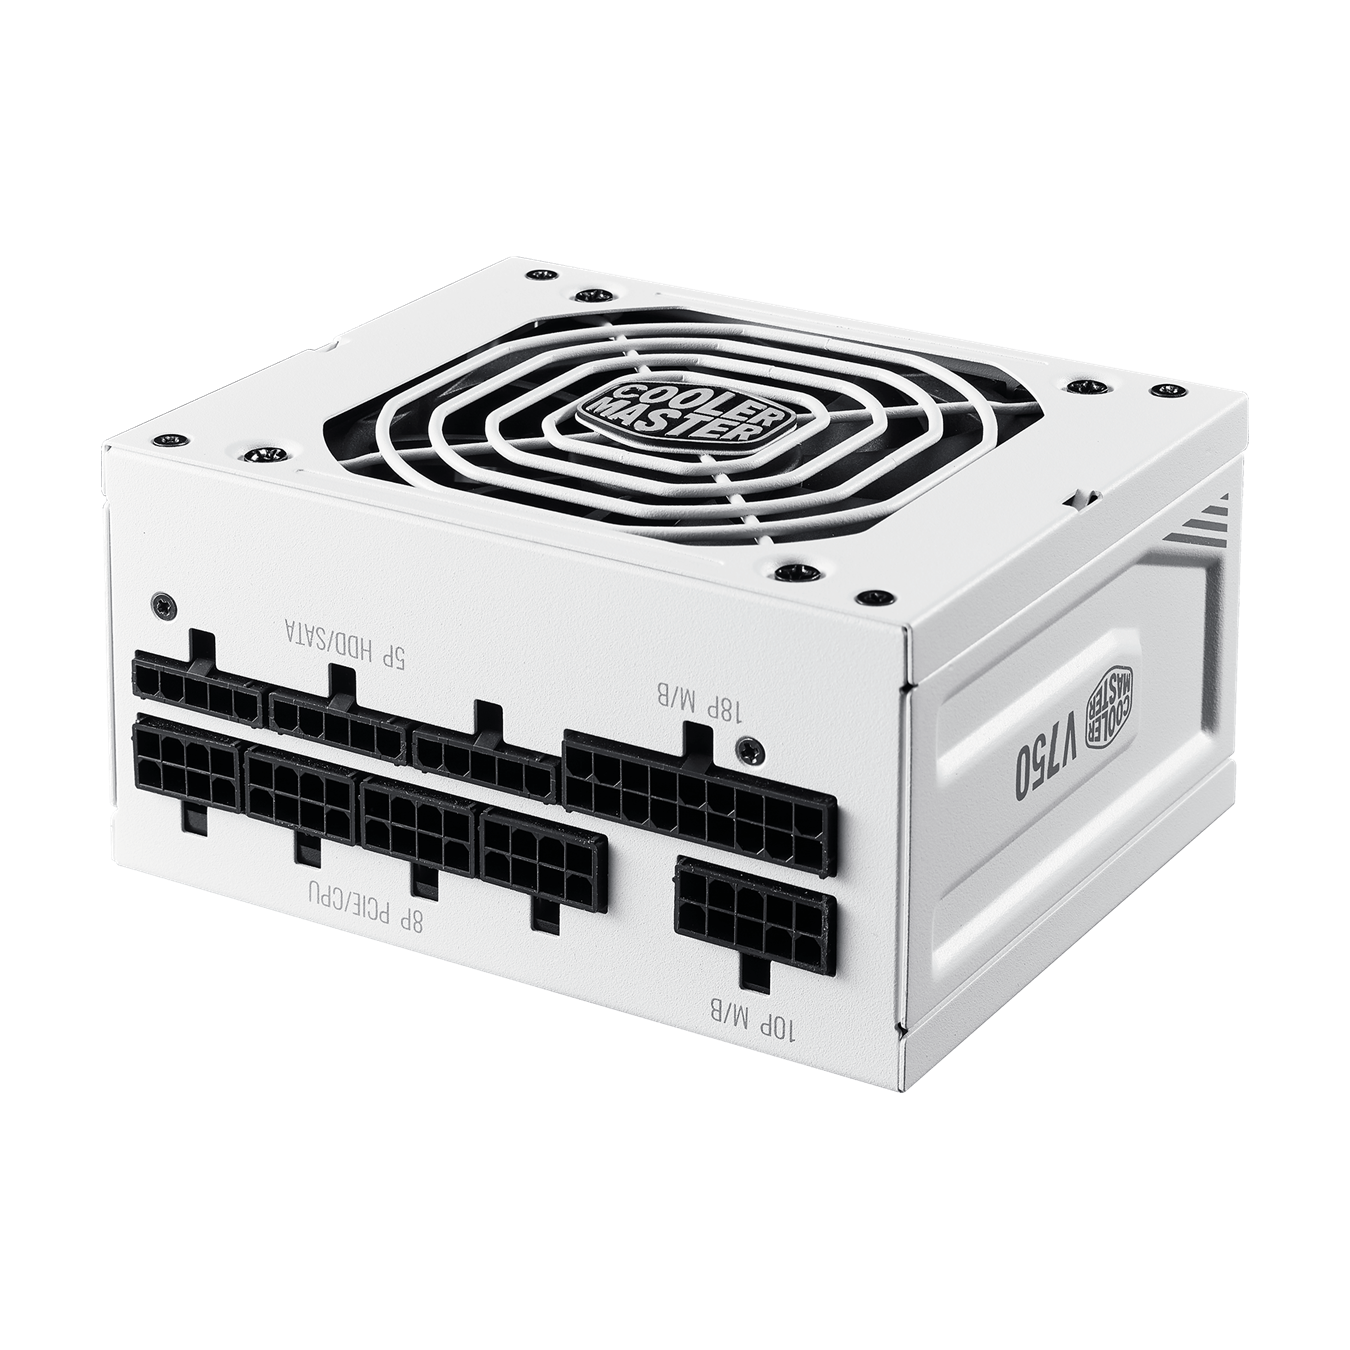 V750 SFX Gold White Edition - fully customizable cabling reduces clutter, increases airflow